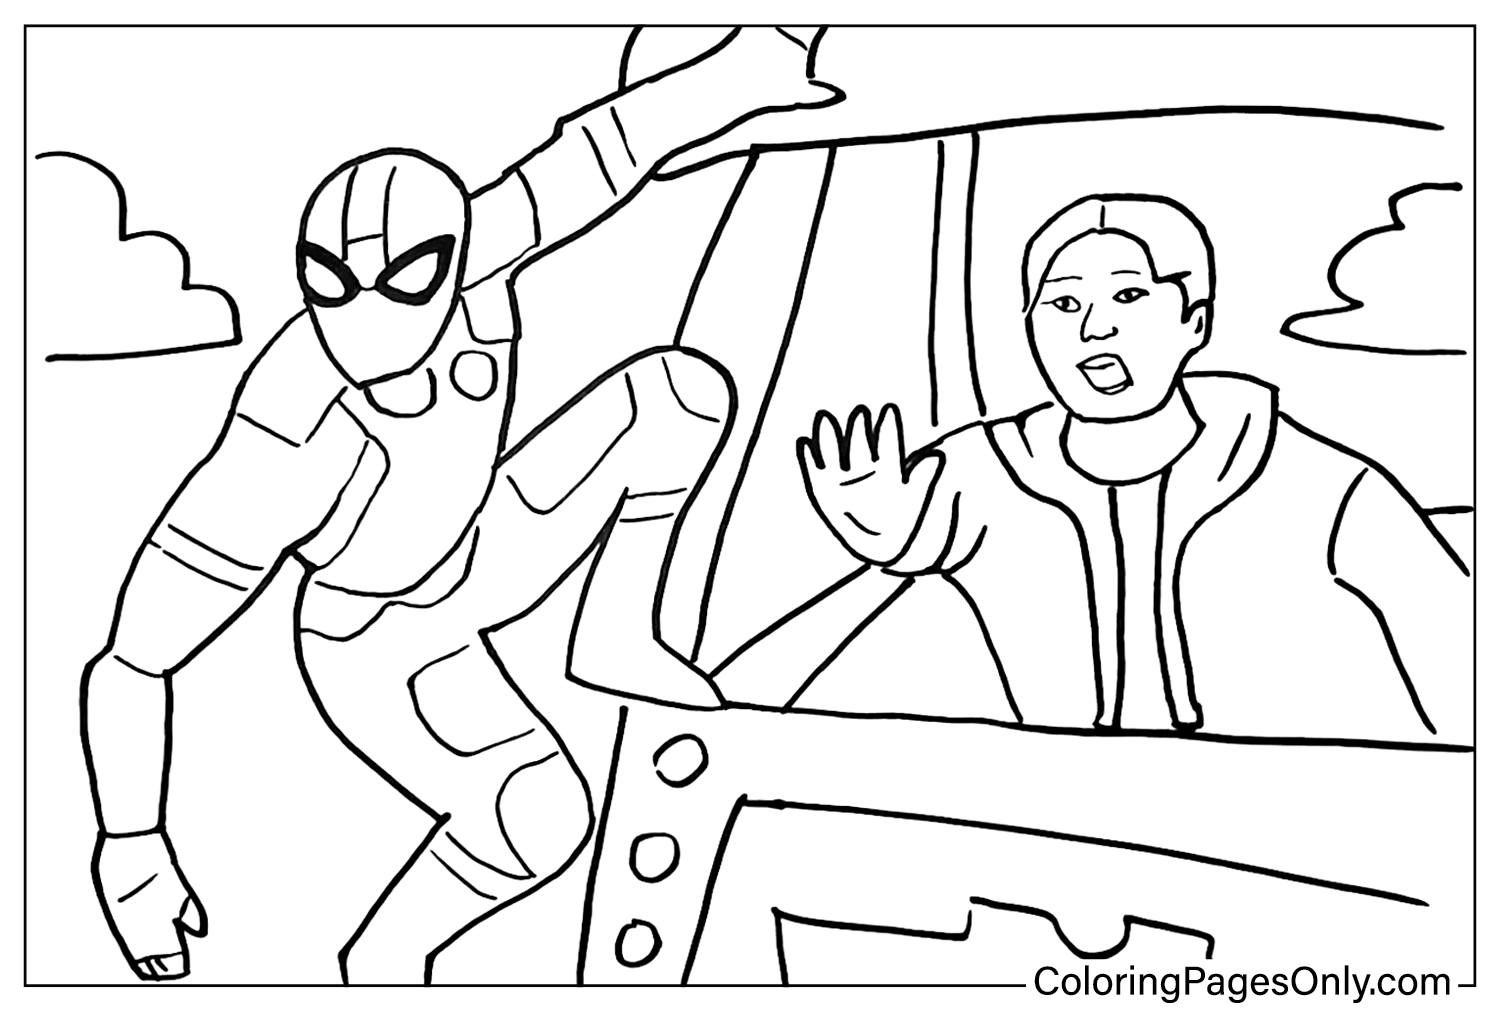 Spider man and Ned Leeds Coloring Pages from Spider-Man Far From Home